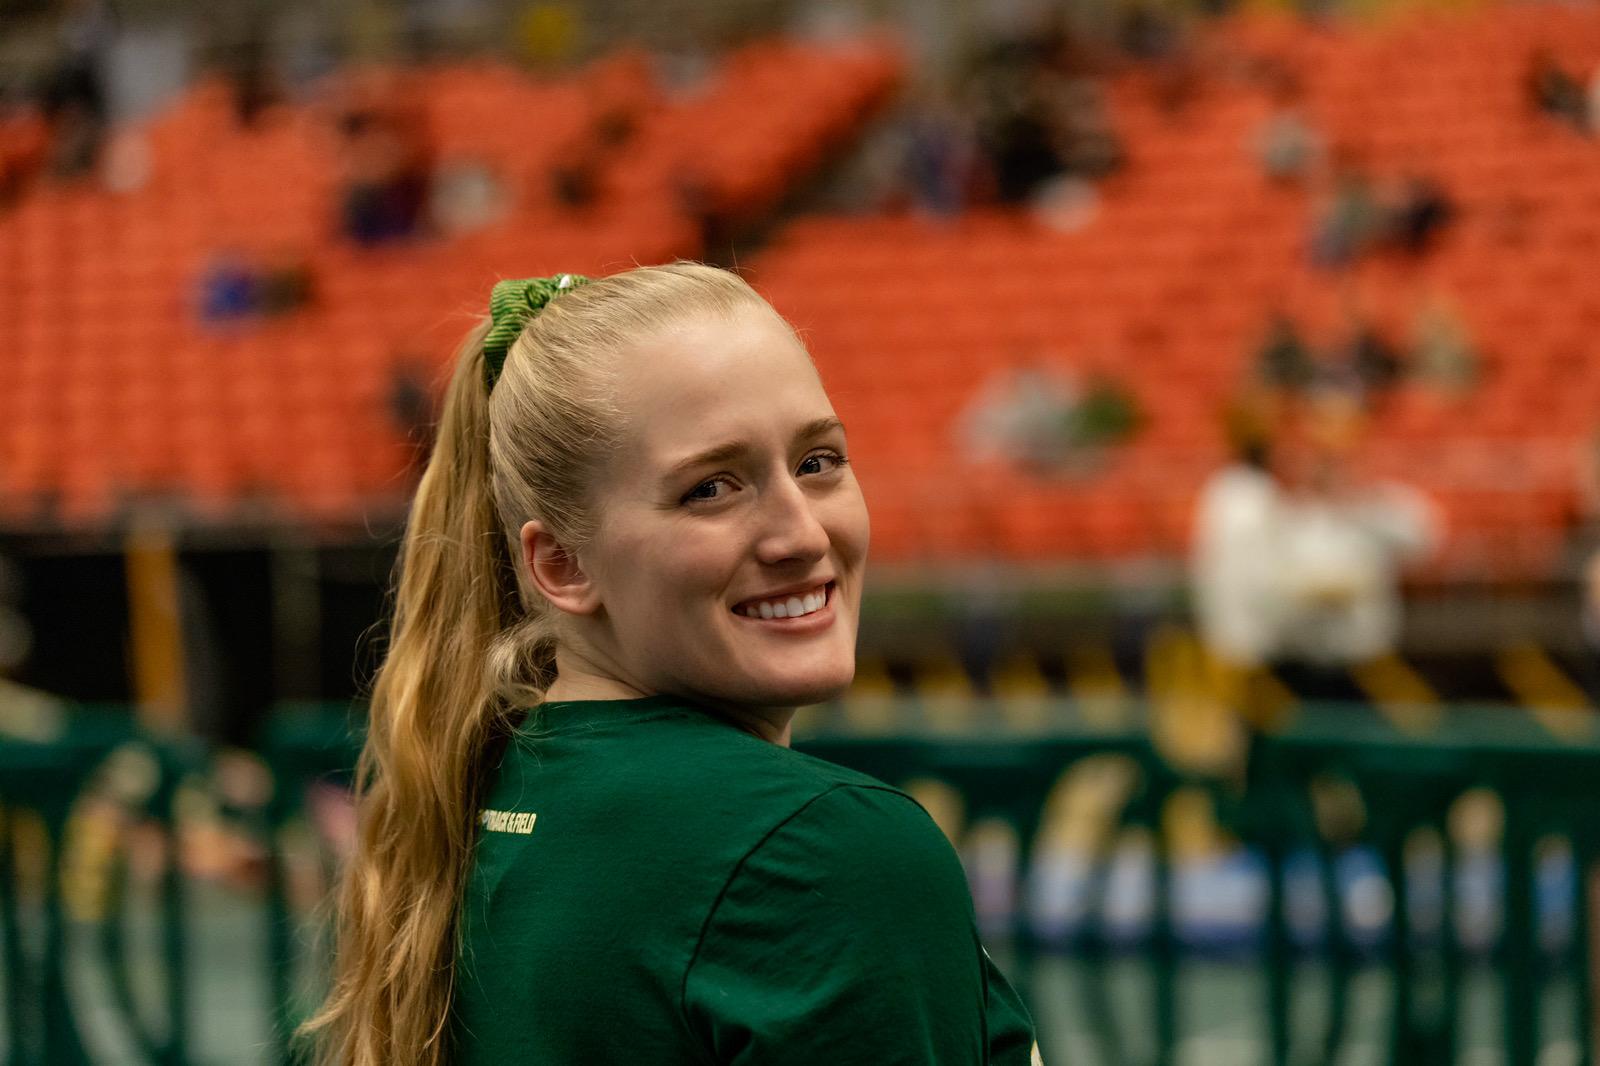 young woman looking over her right shoulder, smiling into the camera in a gymnasium with bleacher blurred out in background